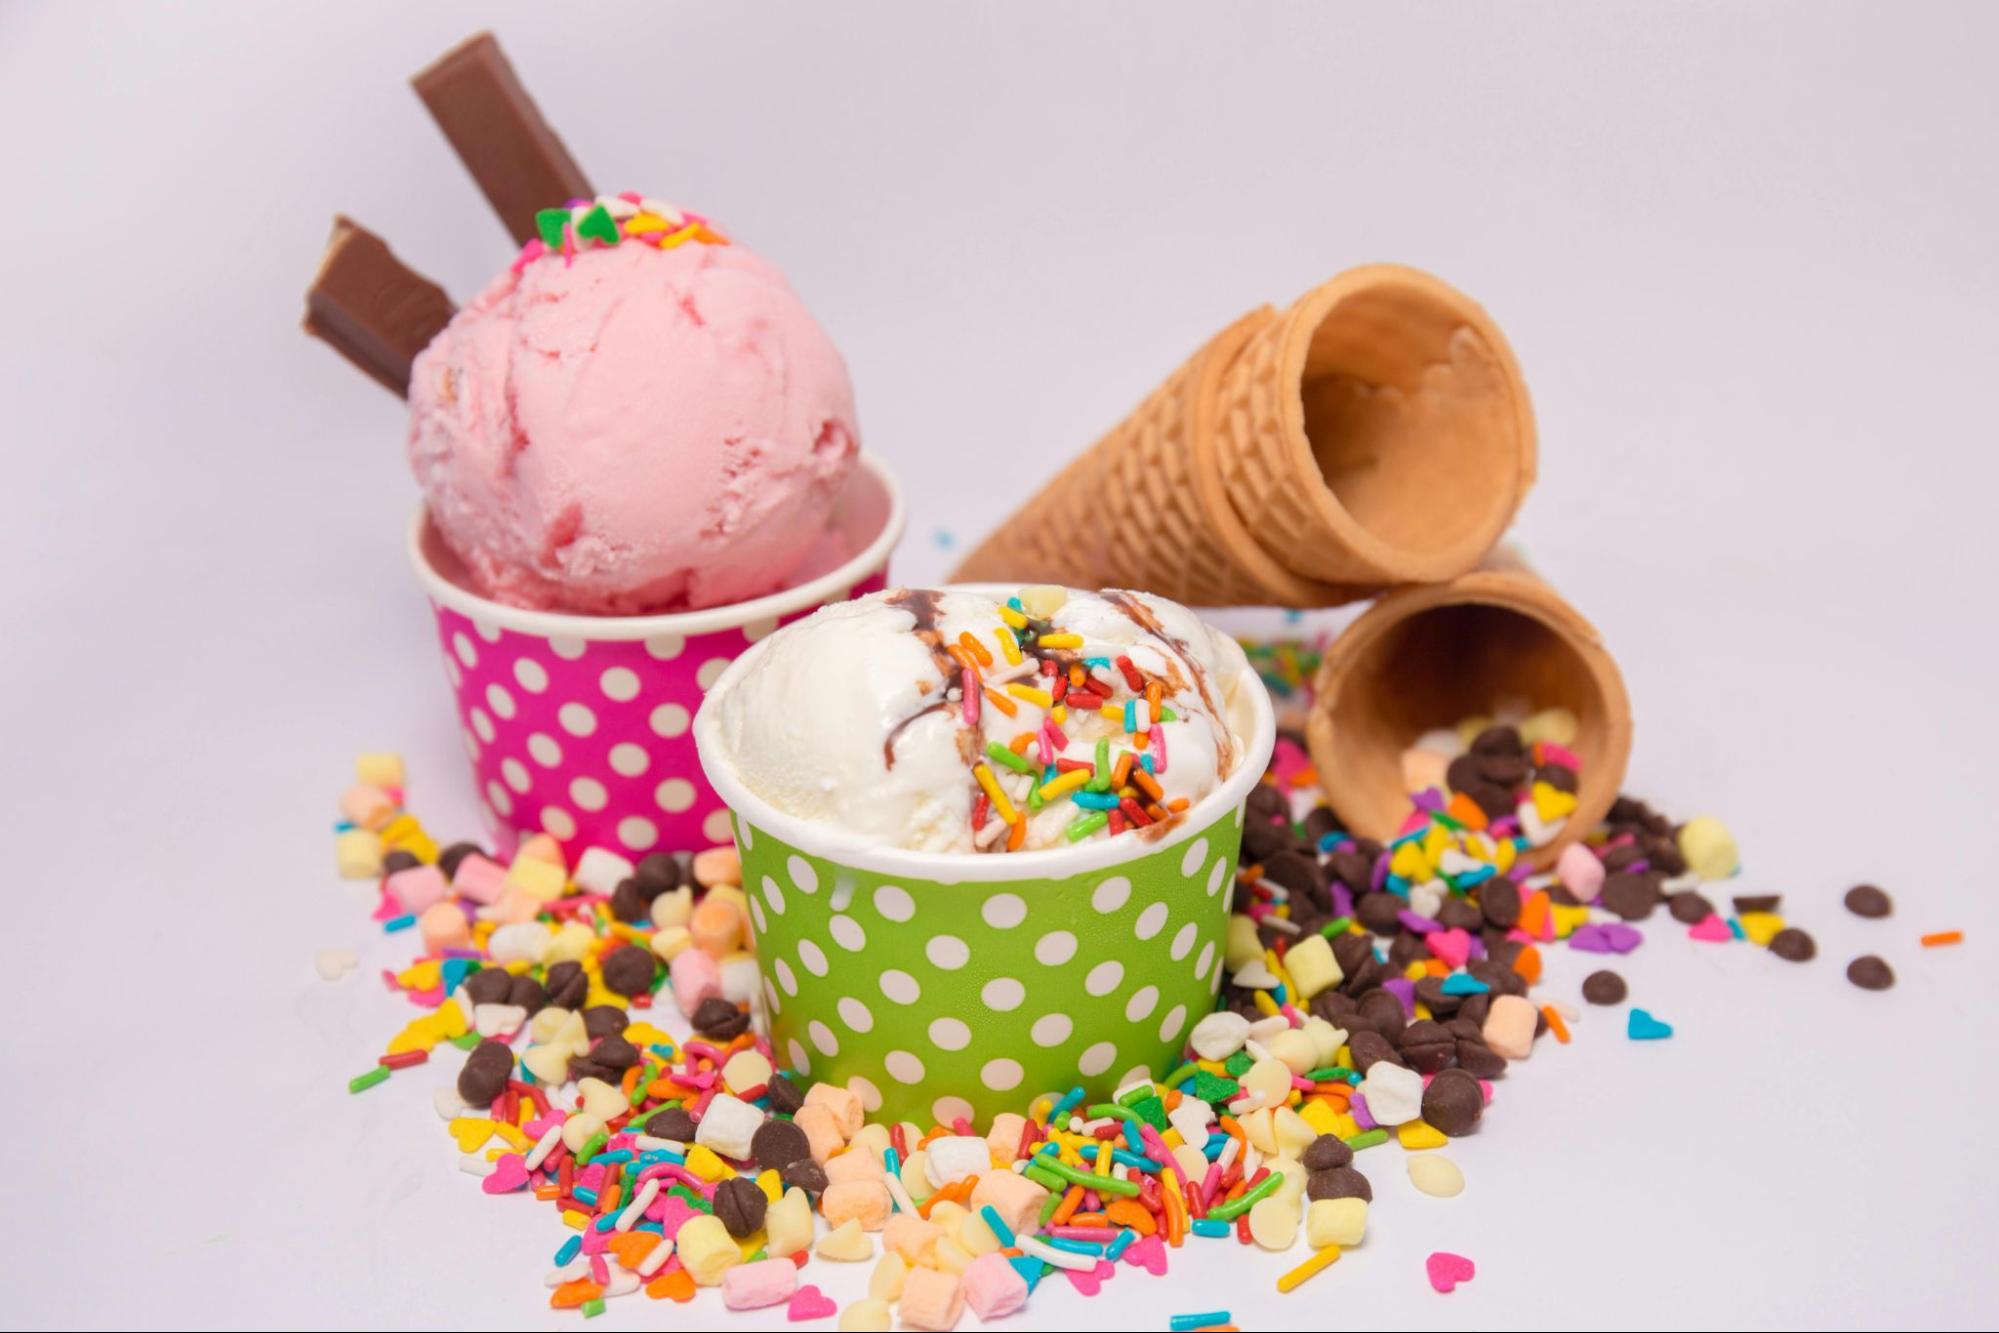 Ice cream cups, cones, and sprinkles